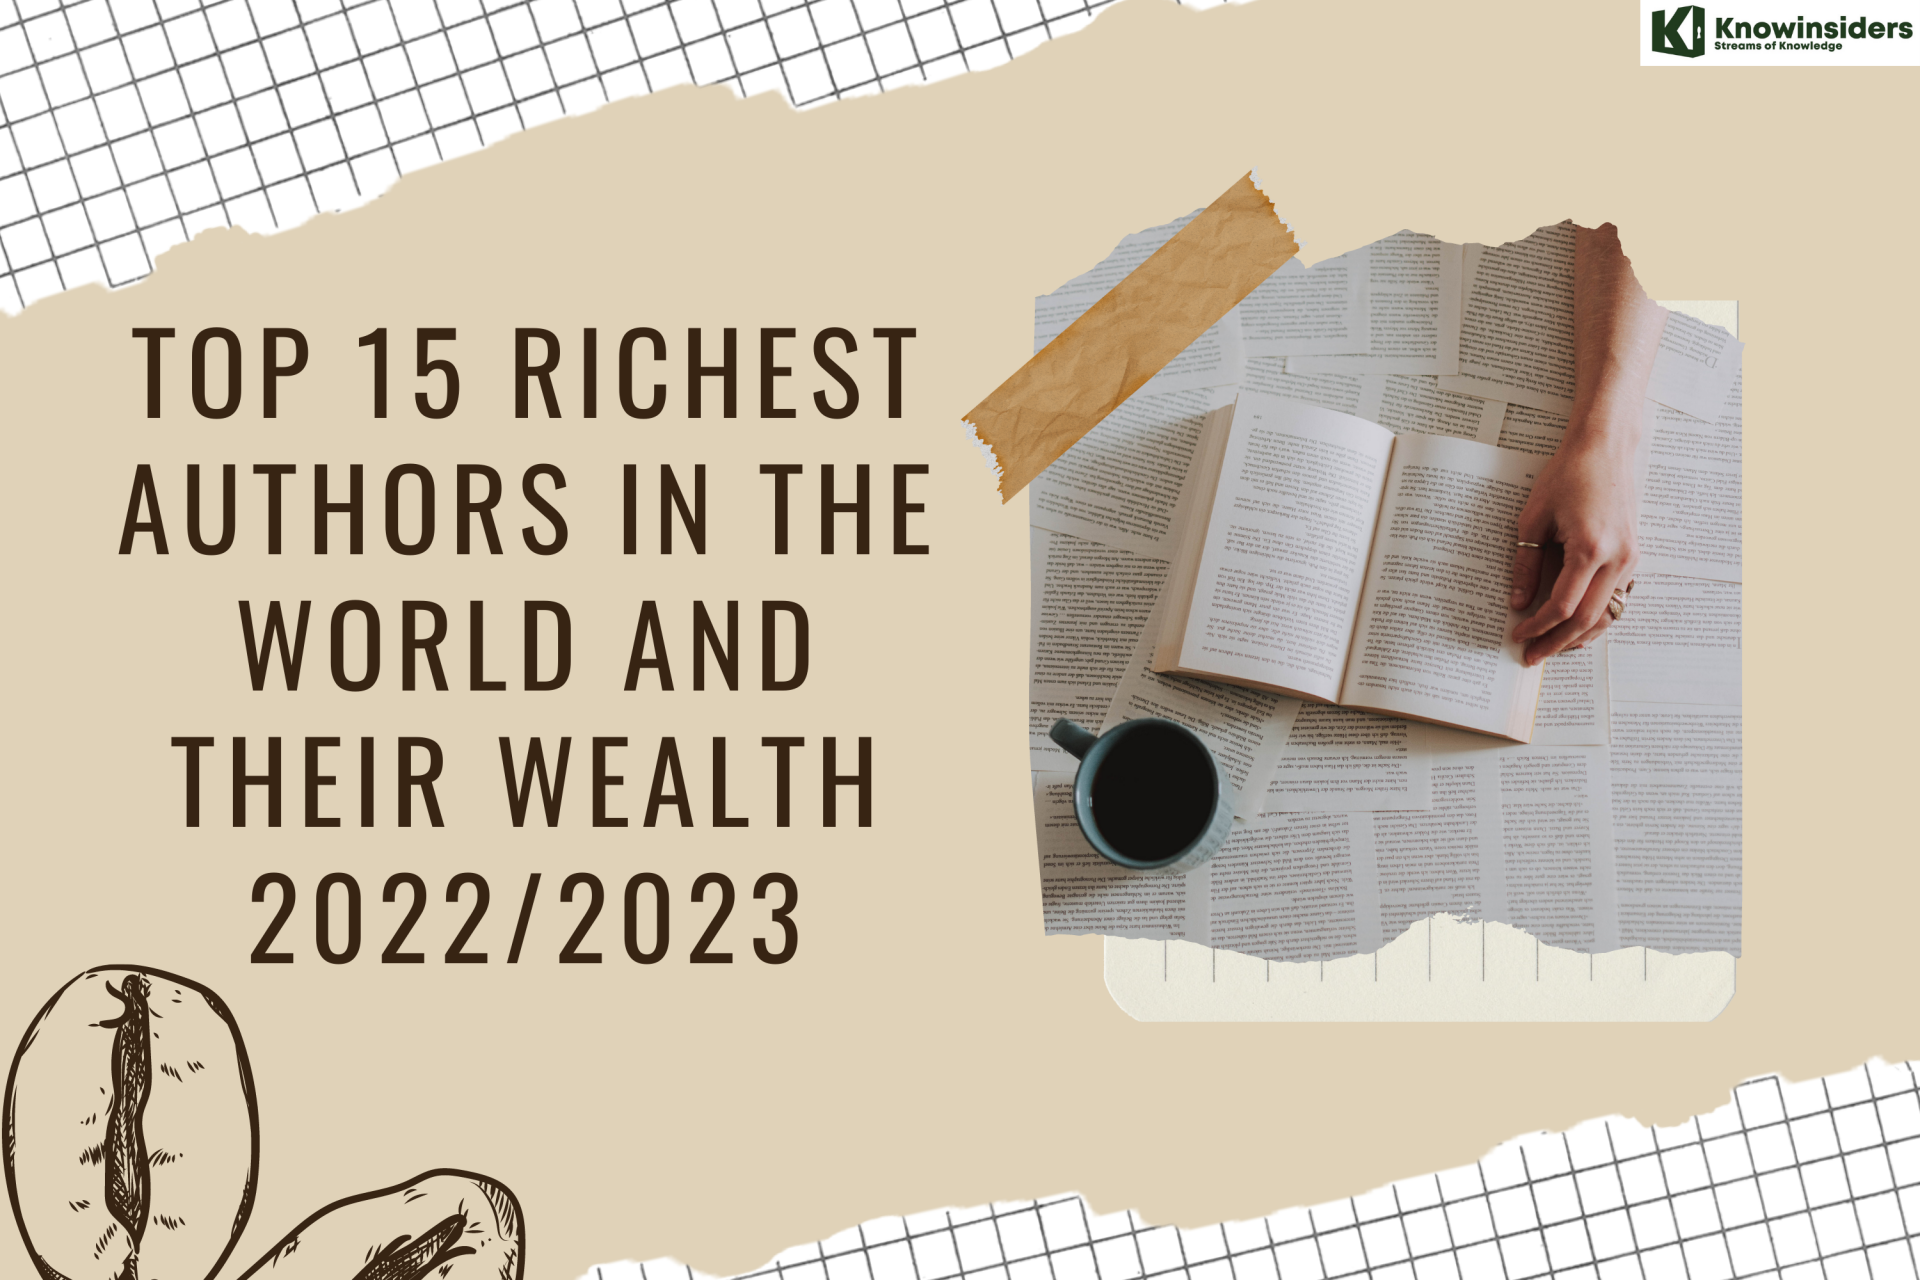 Top 15 Richest Authors In The World and Their Wealth Right Now